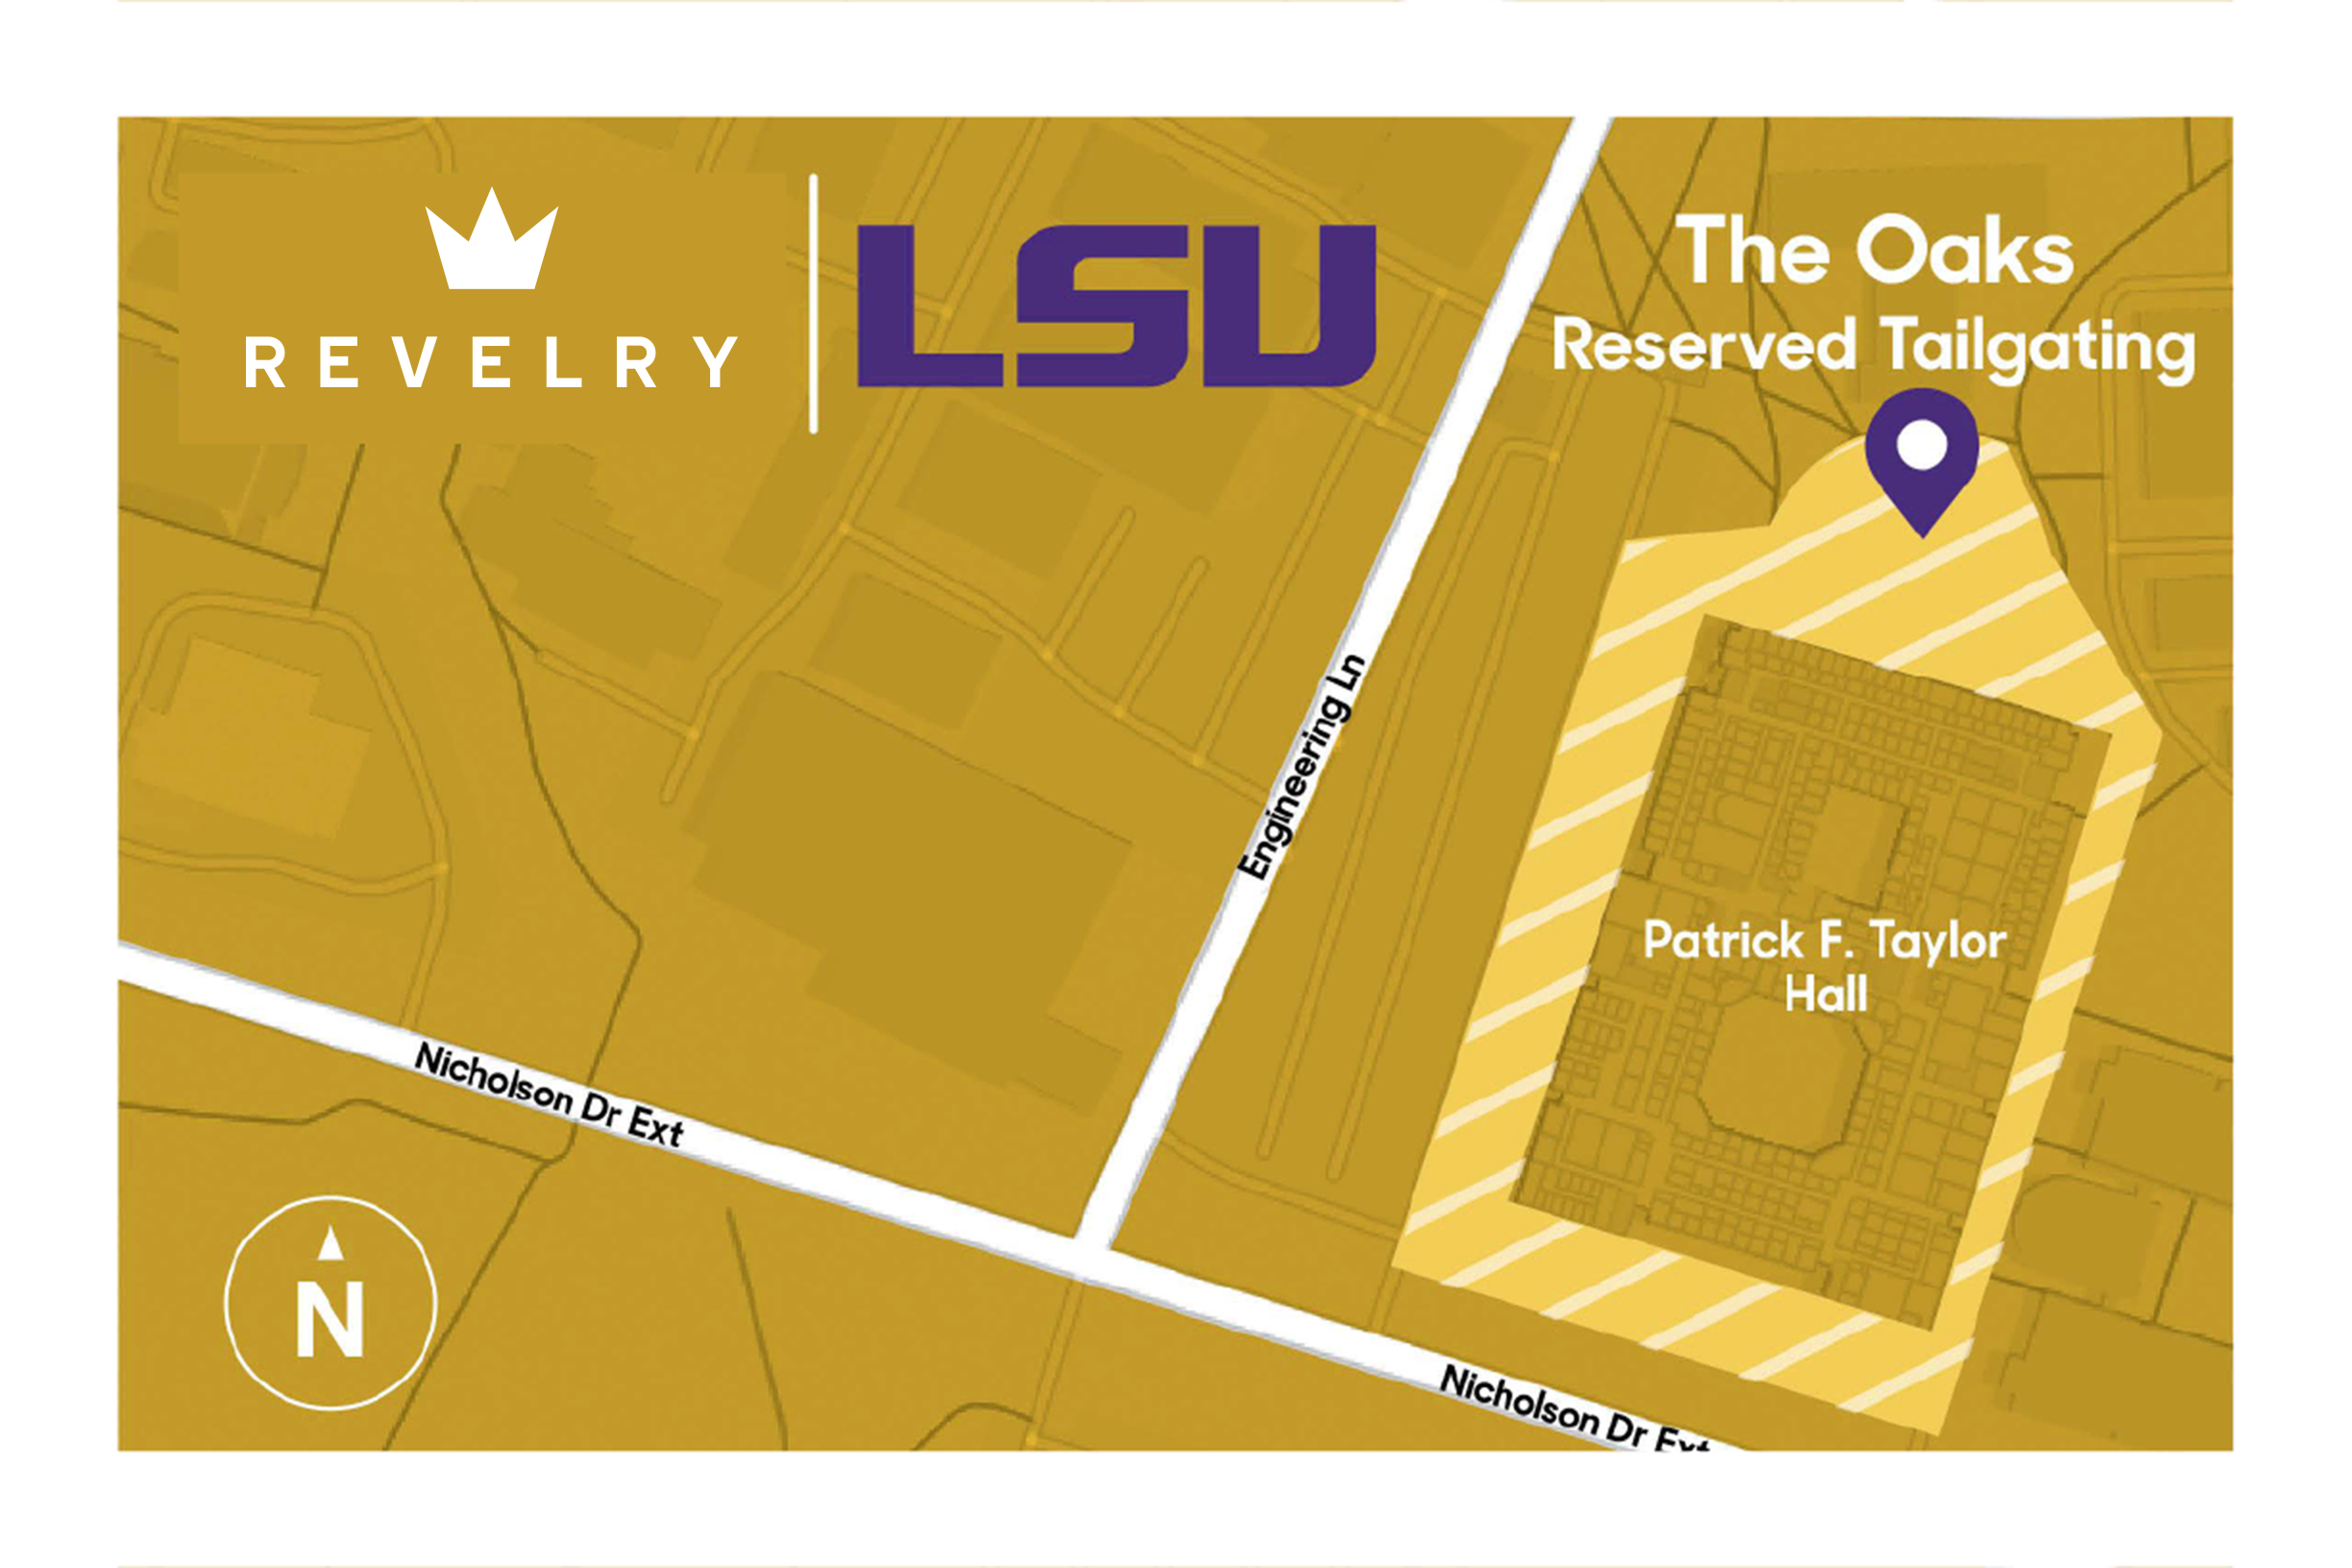 REVELRY TO OFFER TURNKEY TAILGATING AT “THE OAKS” ON LSU CAMPUS